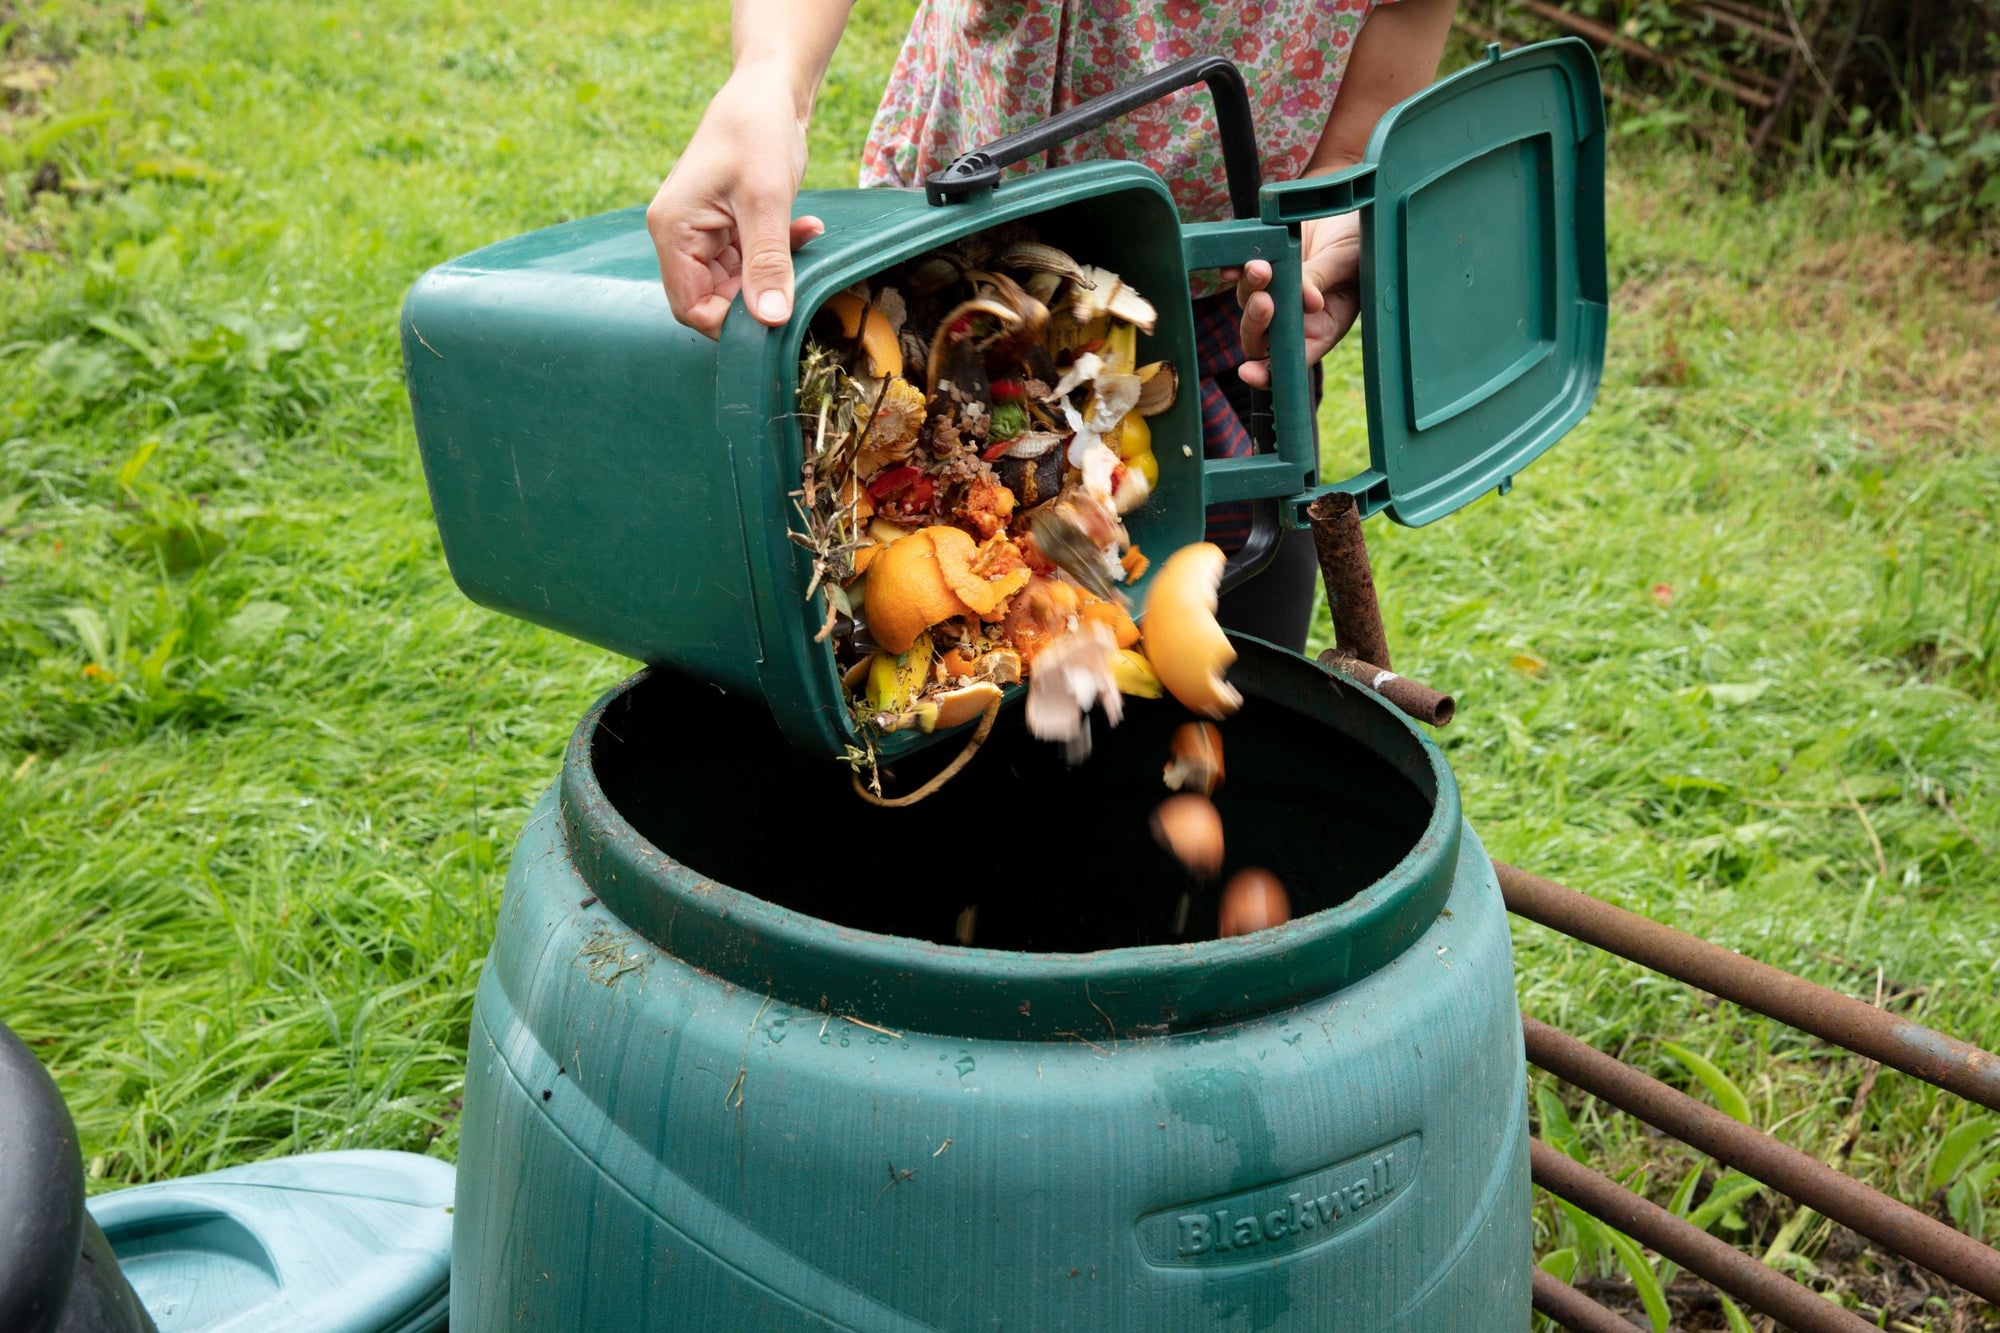 HOW LONG BEFORE YOU'RE COMPOSTING?